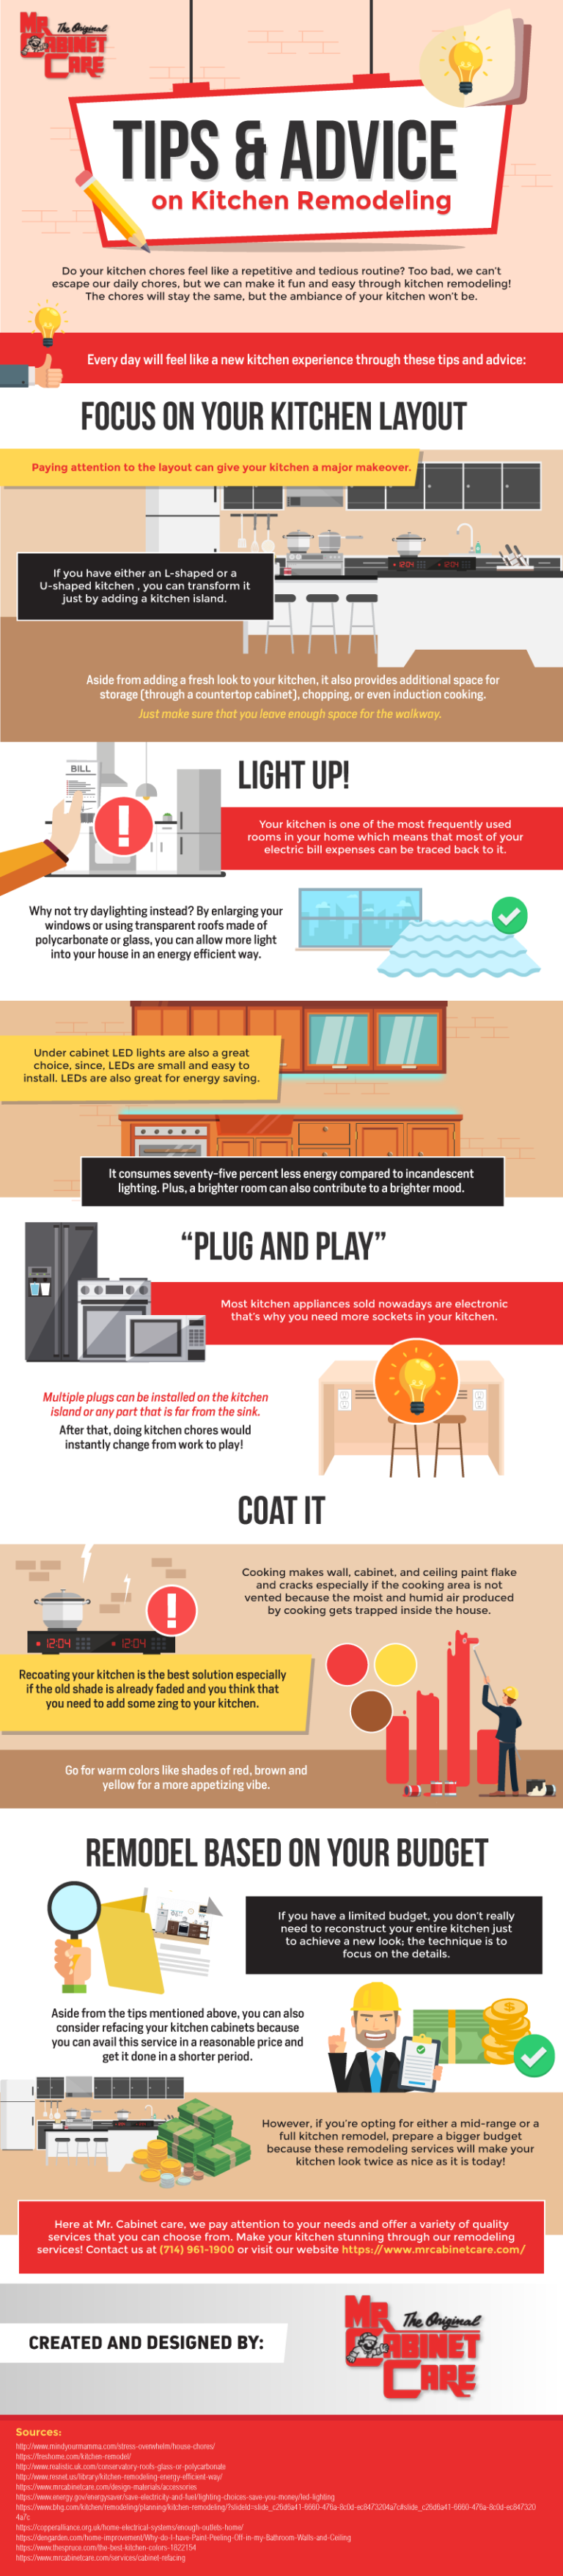 Tips_Advice_on_Kitchen_Remodeling_infographic_image
